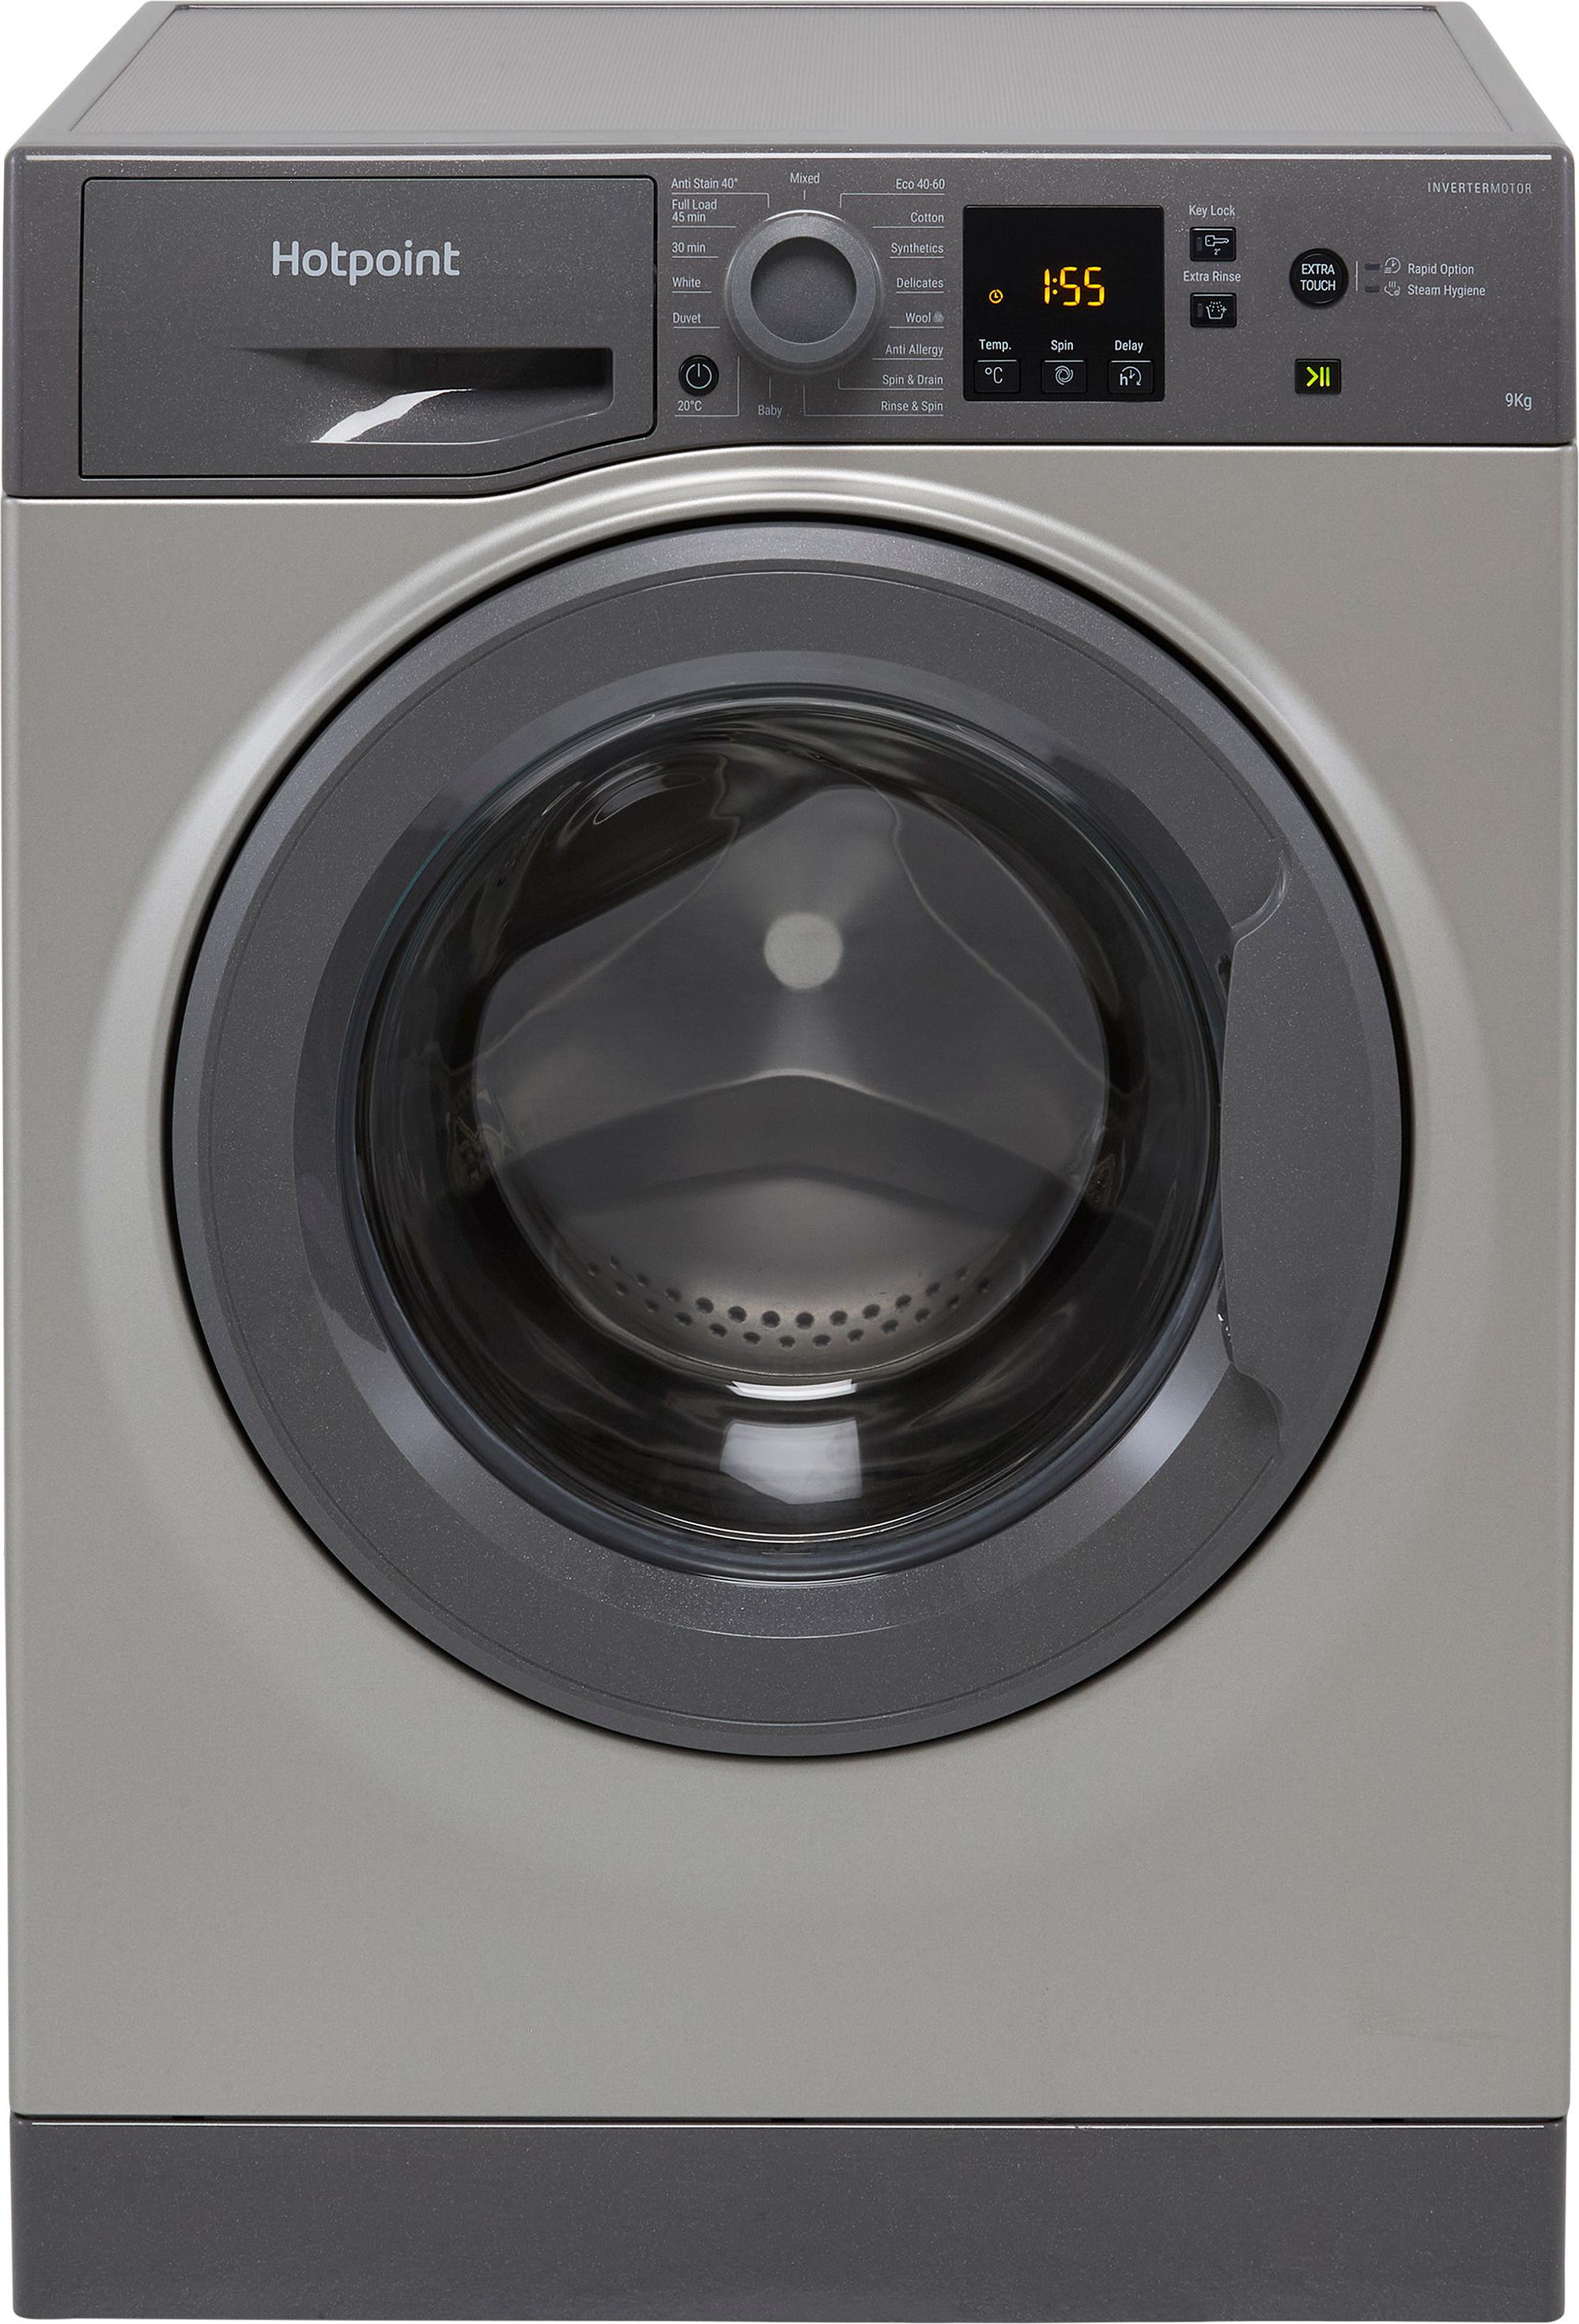 Hotpoint NSWM945CGGUKN 9kg Washing Machine with 1400 rpm - Graphite - B Rated, Silver